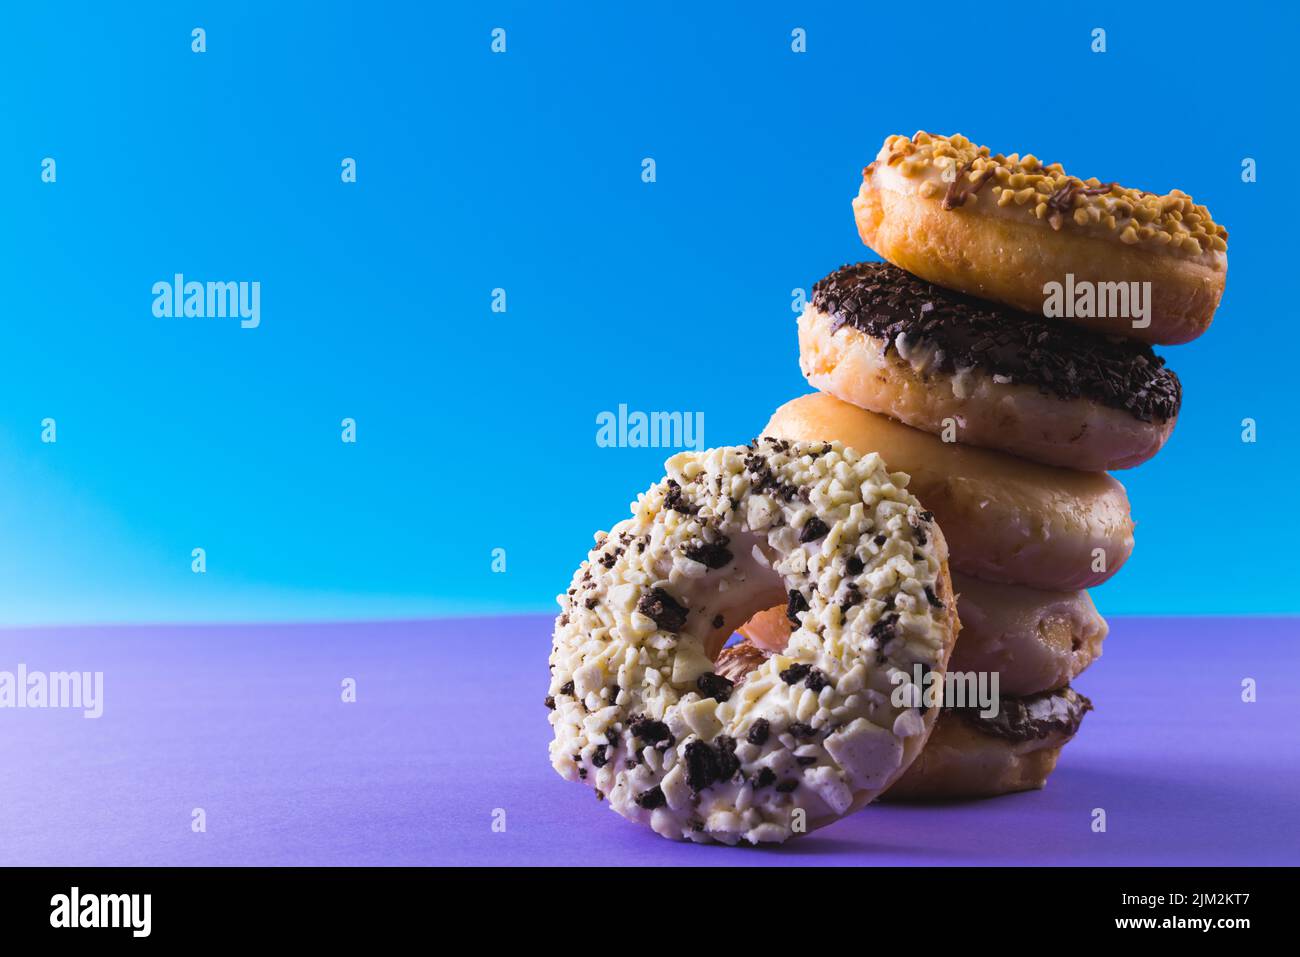 Close-up of fresh donuts stacked tilted by copy space against blue background. unaltered, unhealthy eating and sweet food concept. Stock Photo